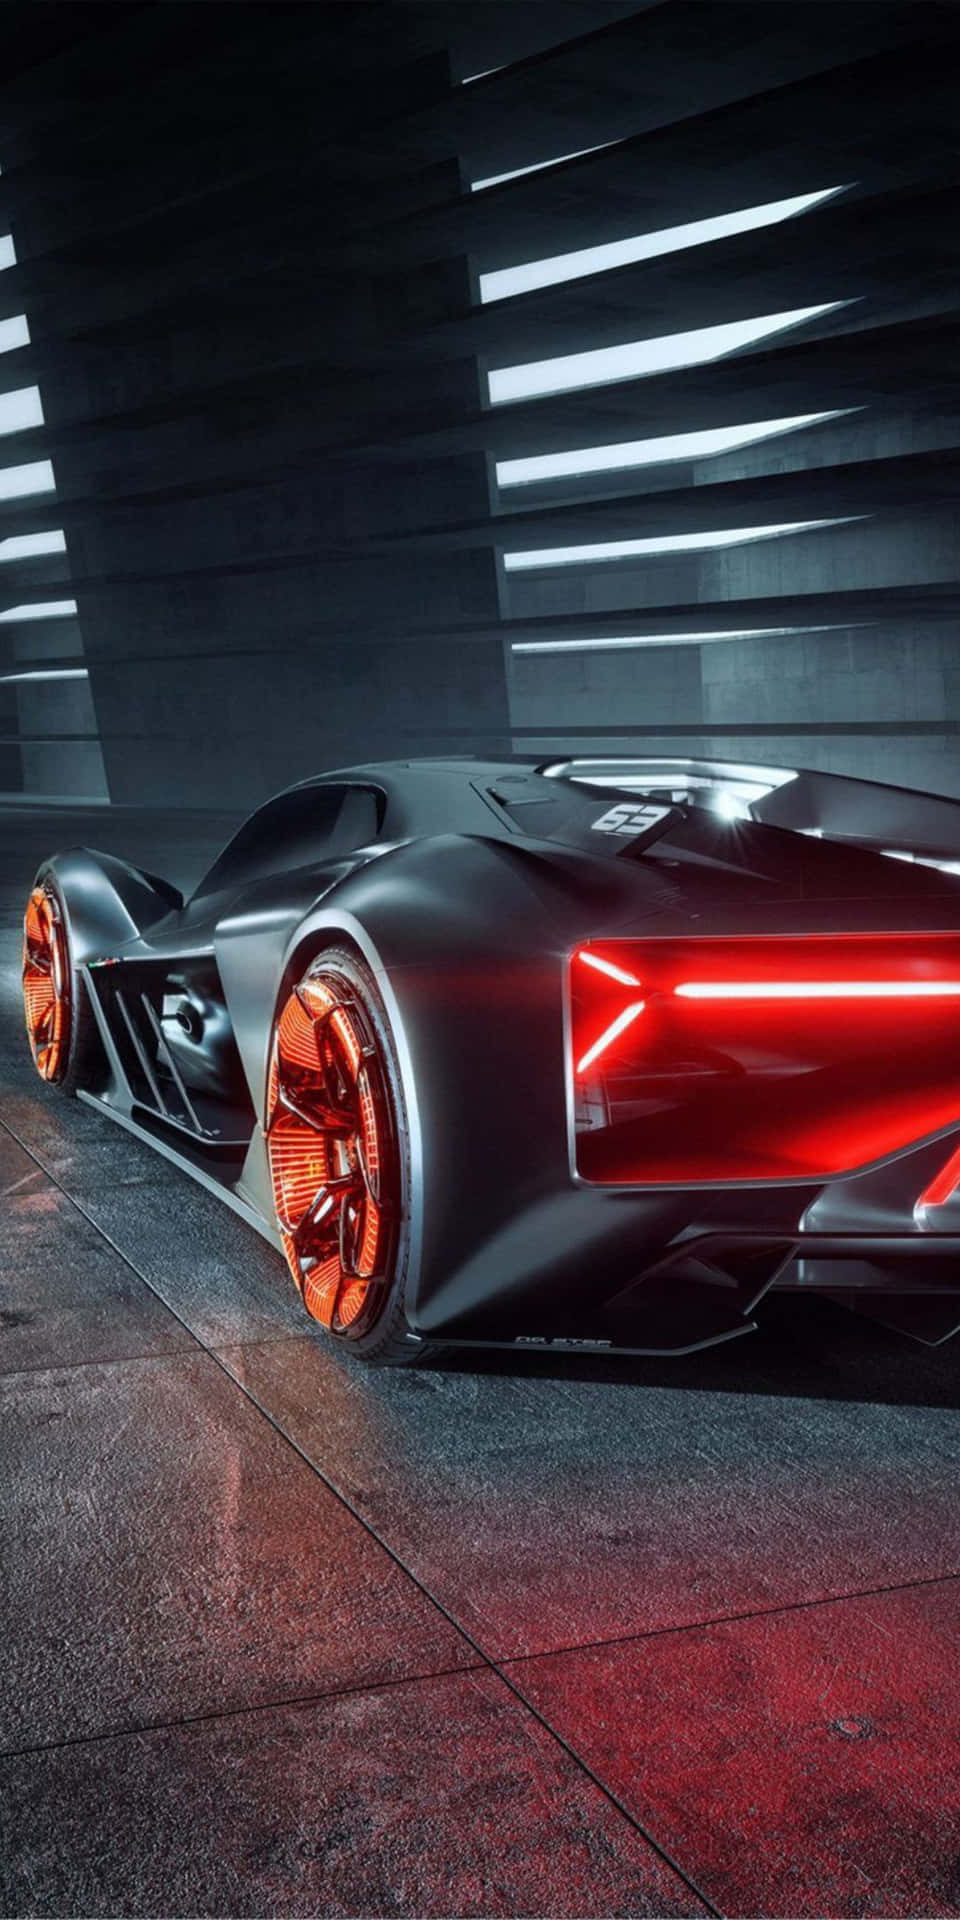 A Futuristic Car With Red Lights In The Background